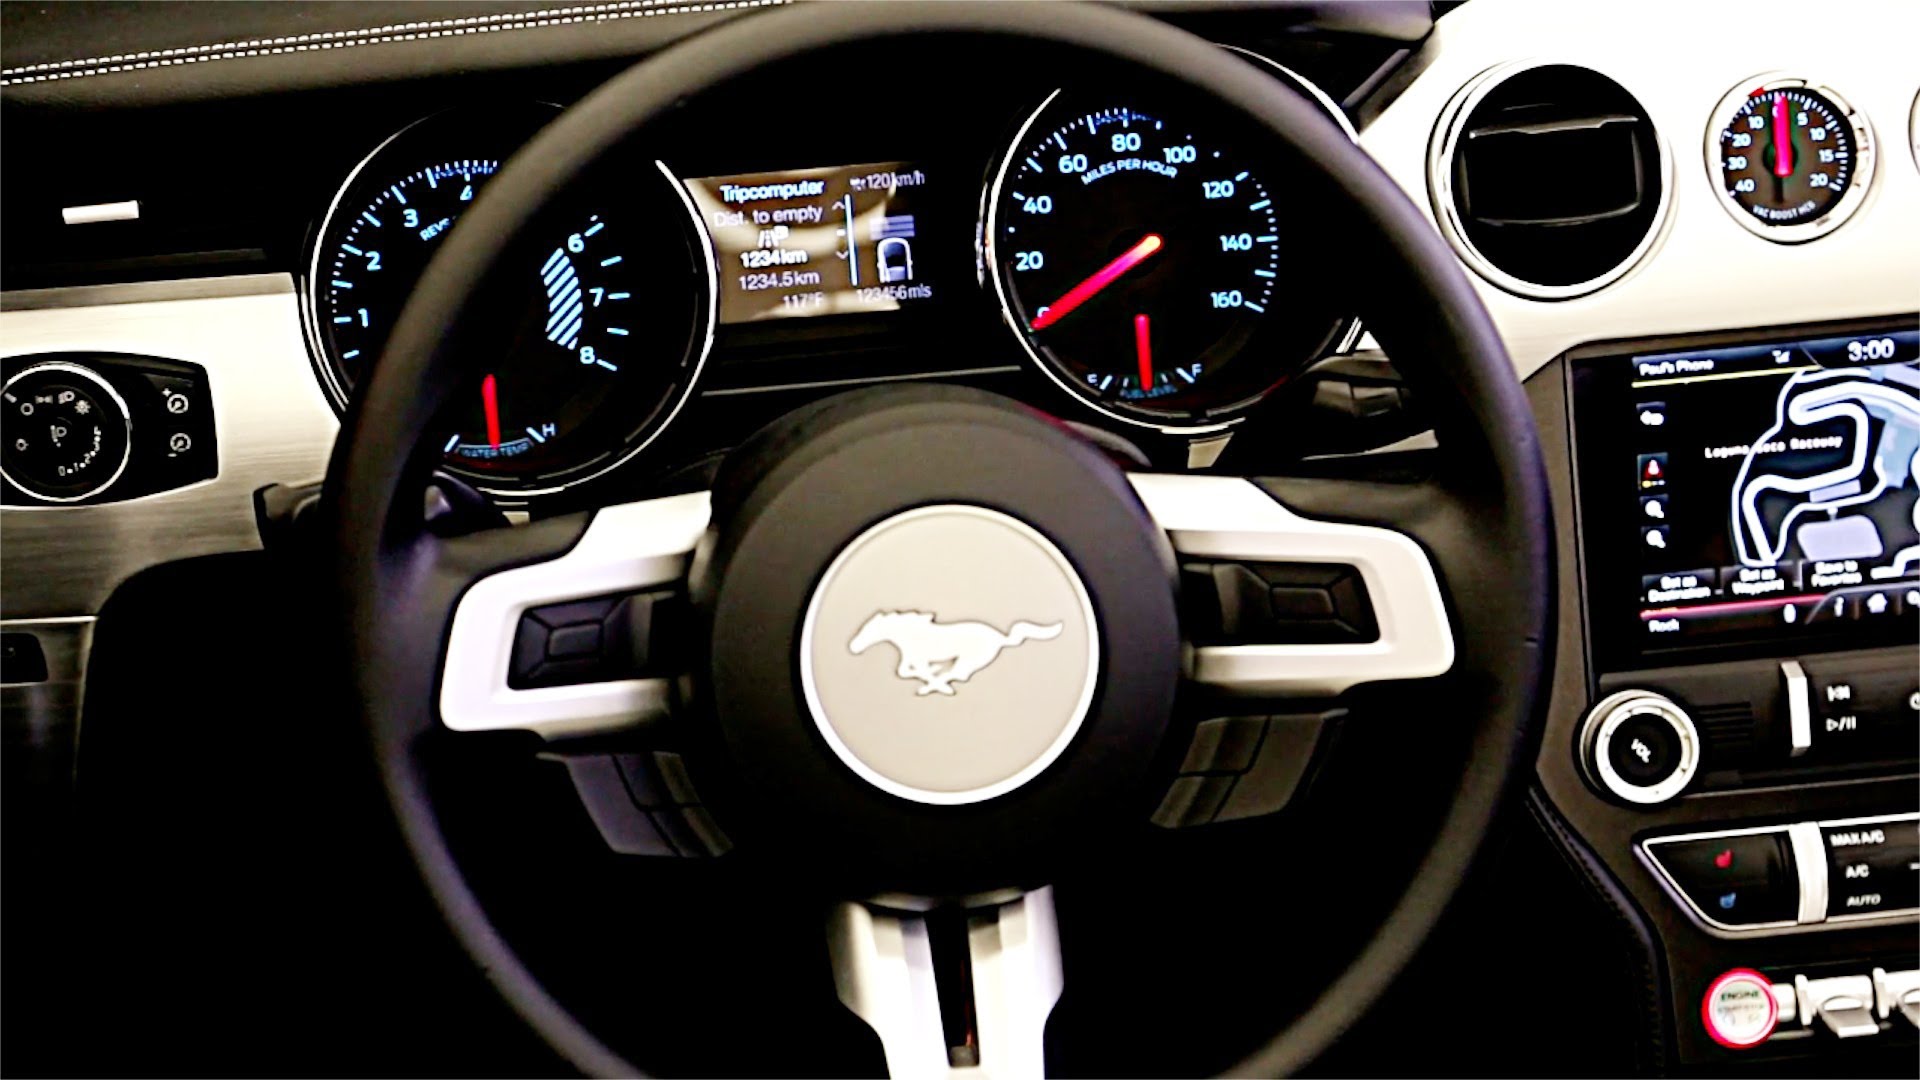 NEW 2015 Ford Mustang INTERIOR - YouTube